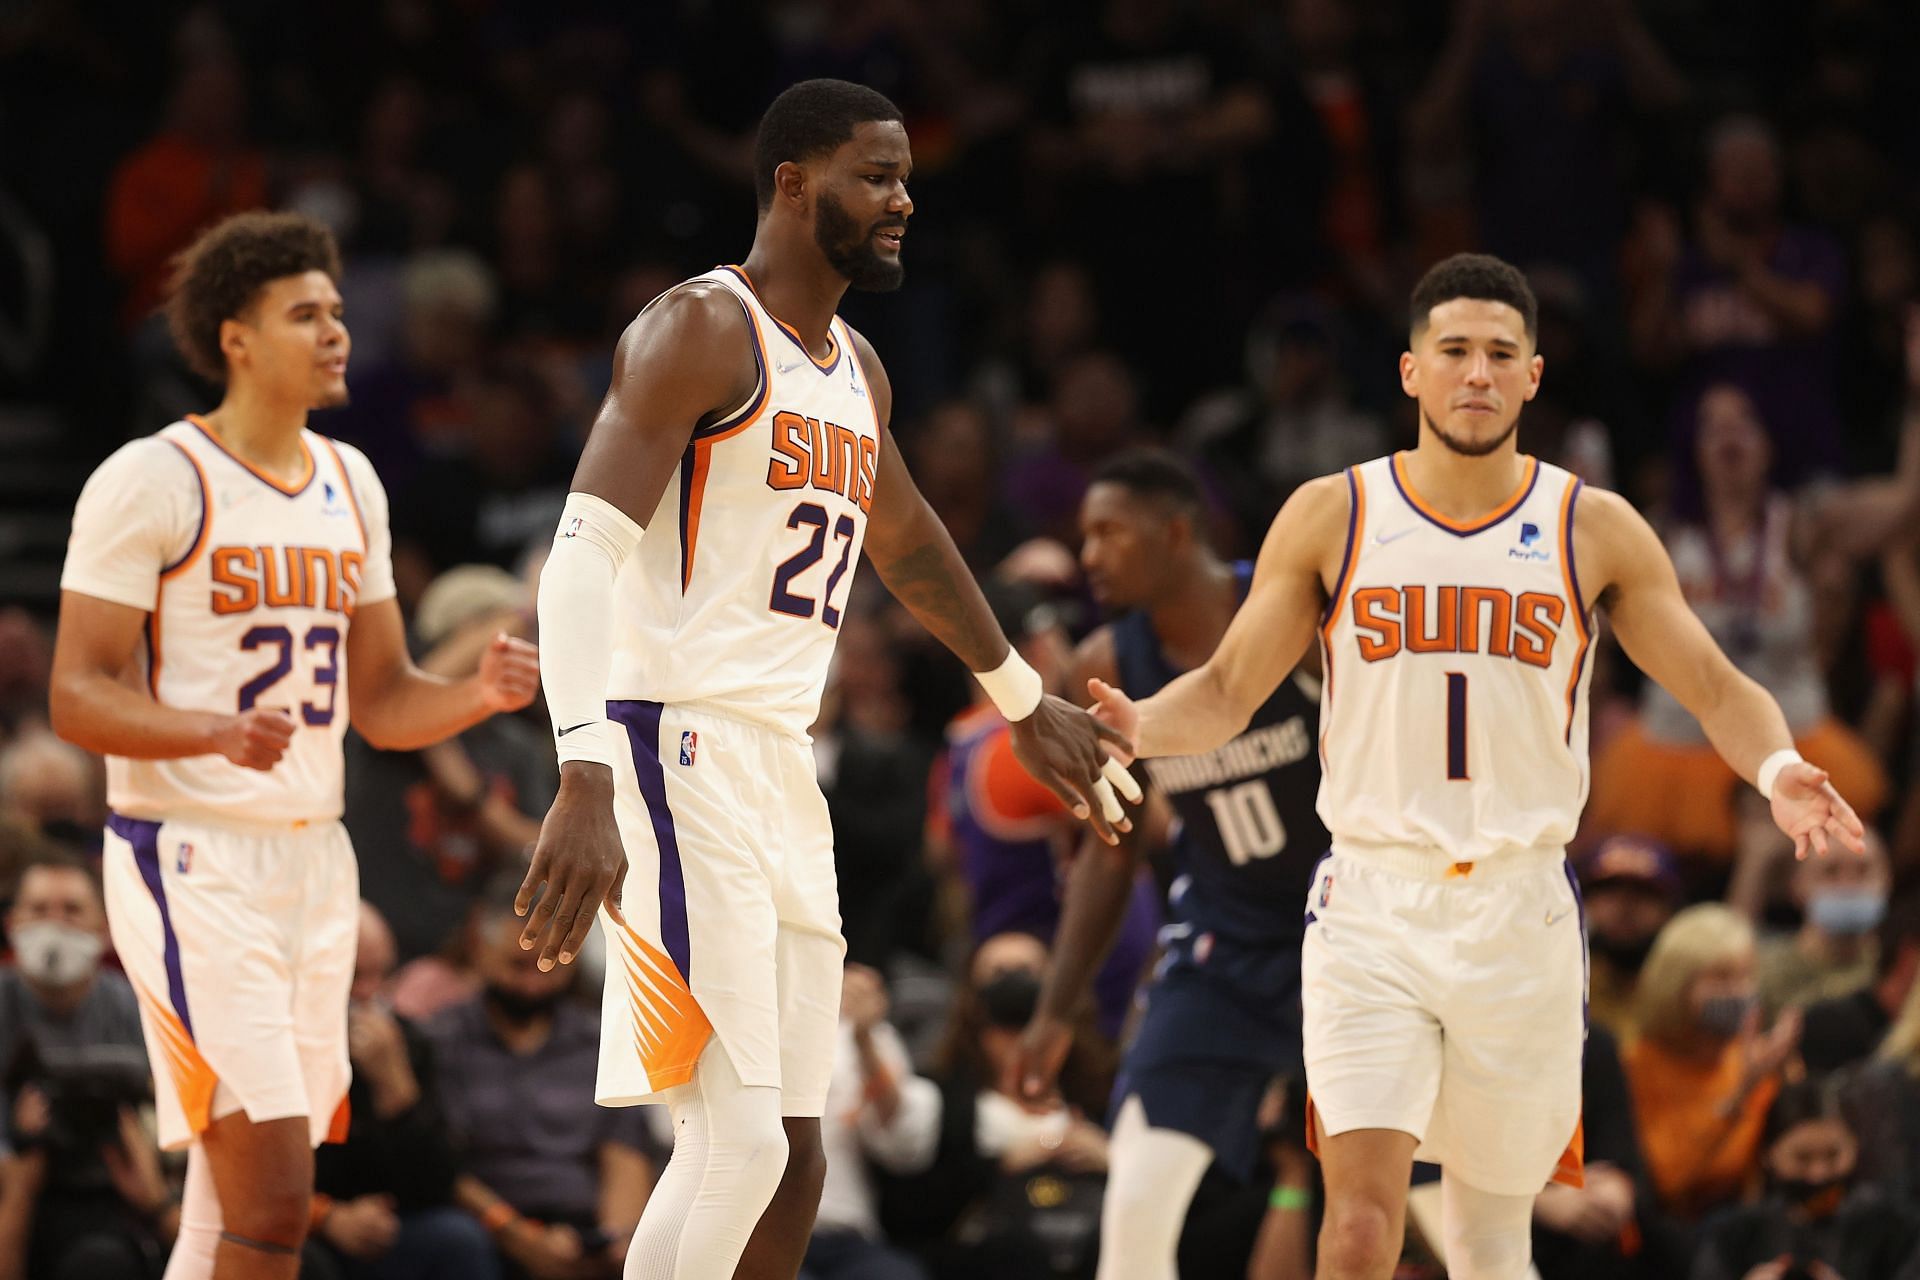 The Phoenix Suns are om a hot 11-game win streak at the moment